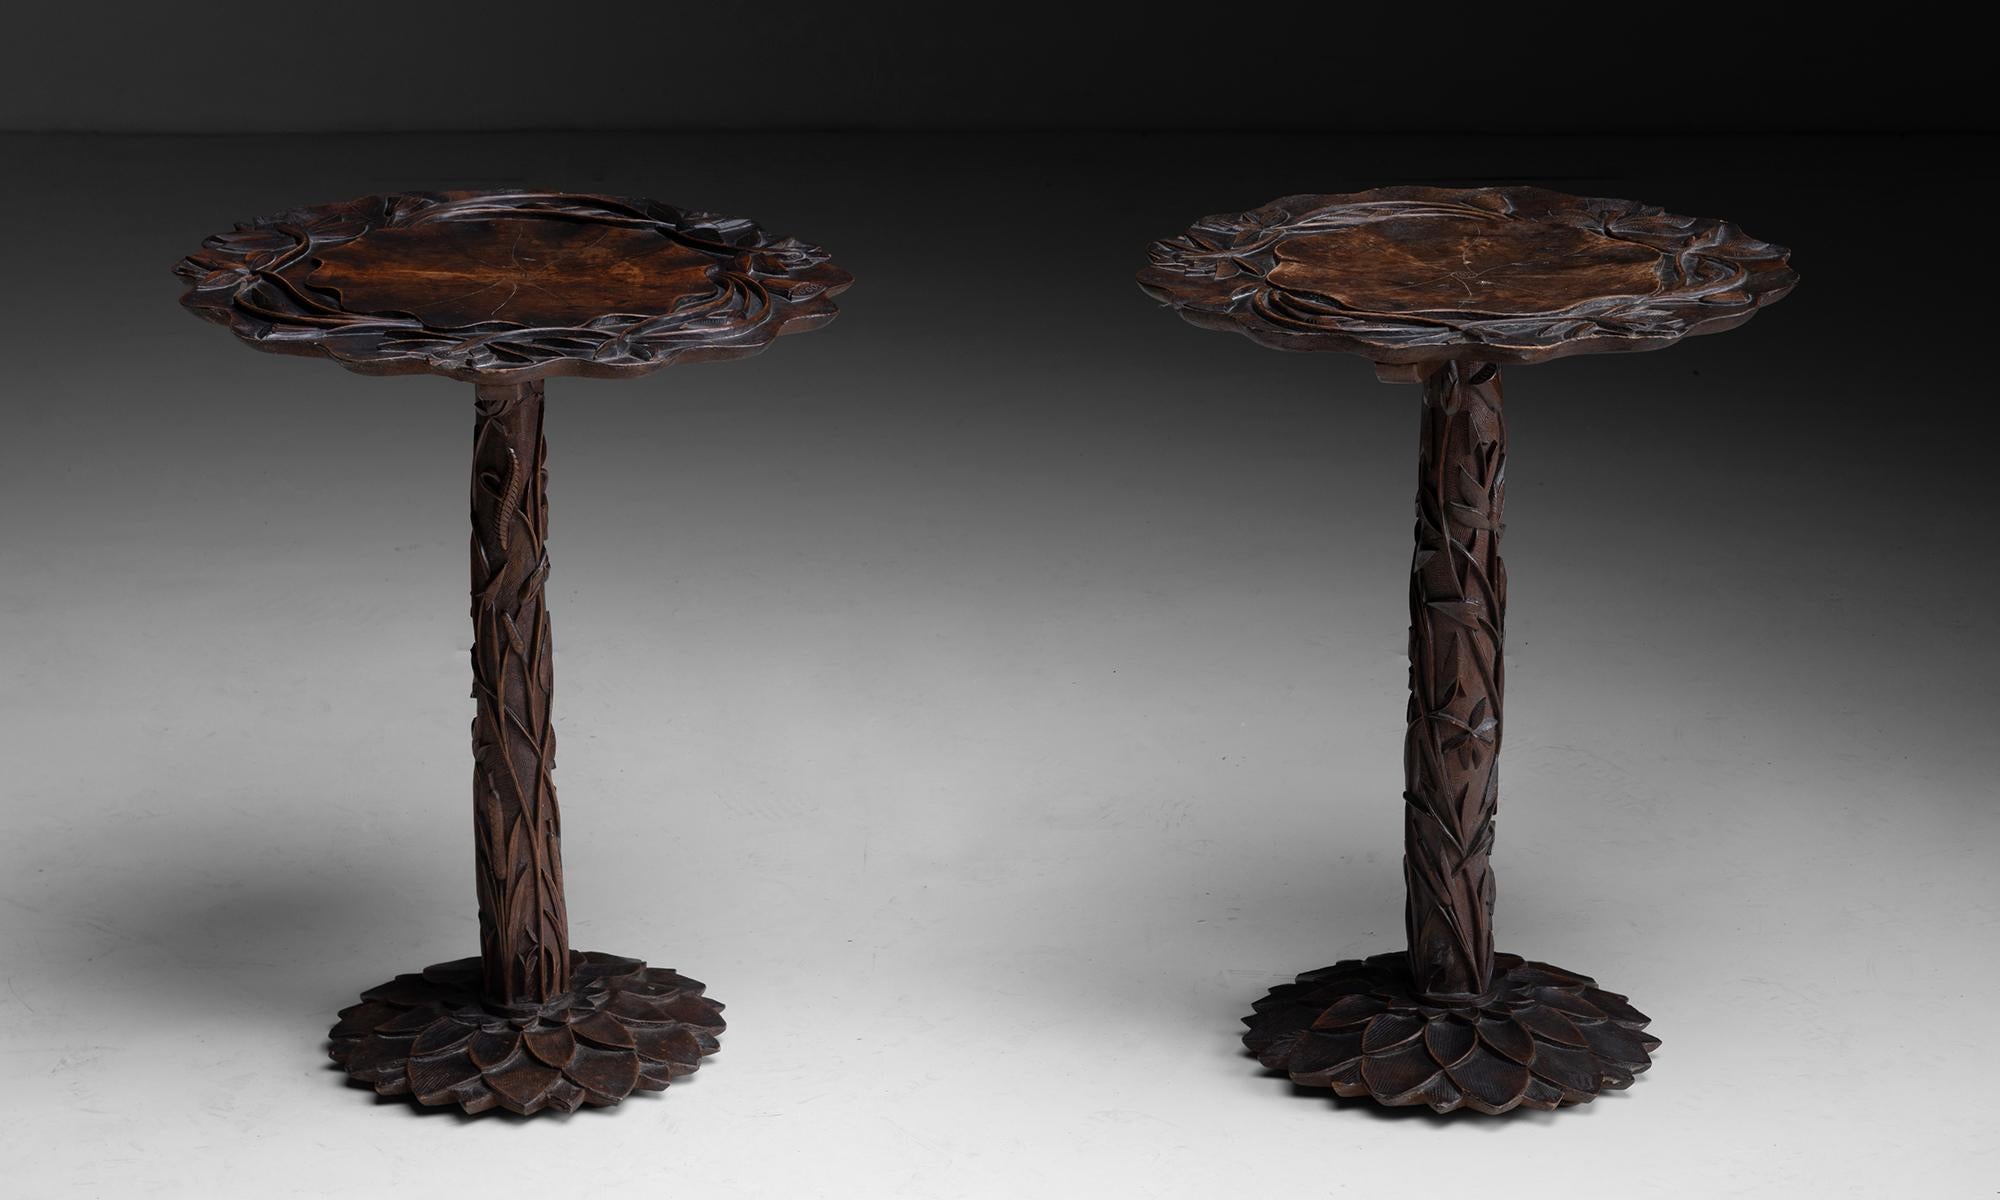 Carved Burmese Side Table

Asia circa 1910

Elegant side table with carved petals, flowers and foliage.

Measures 16.5”dia x 21.5”h

